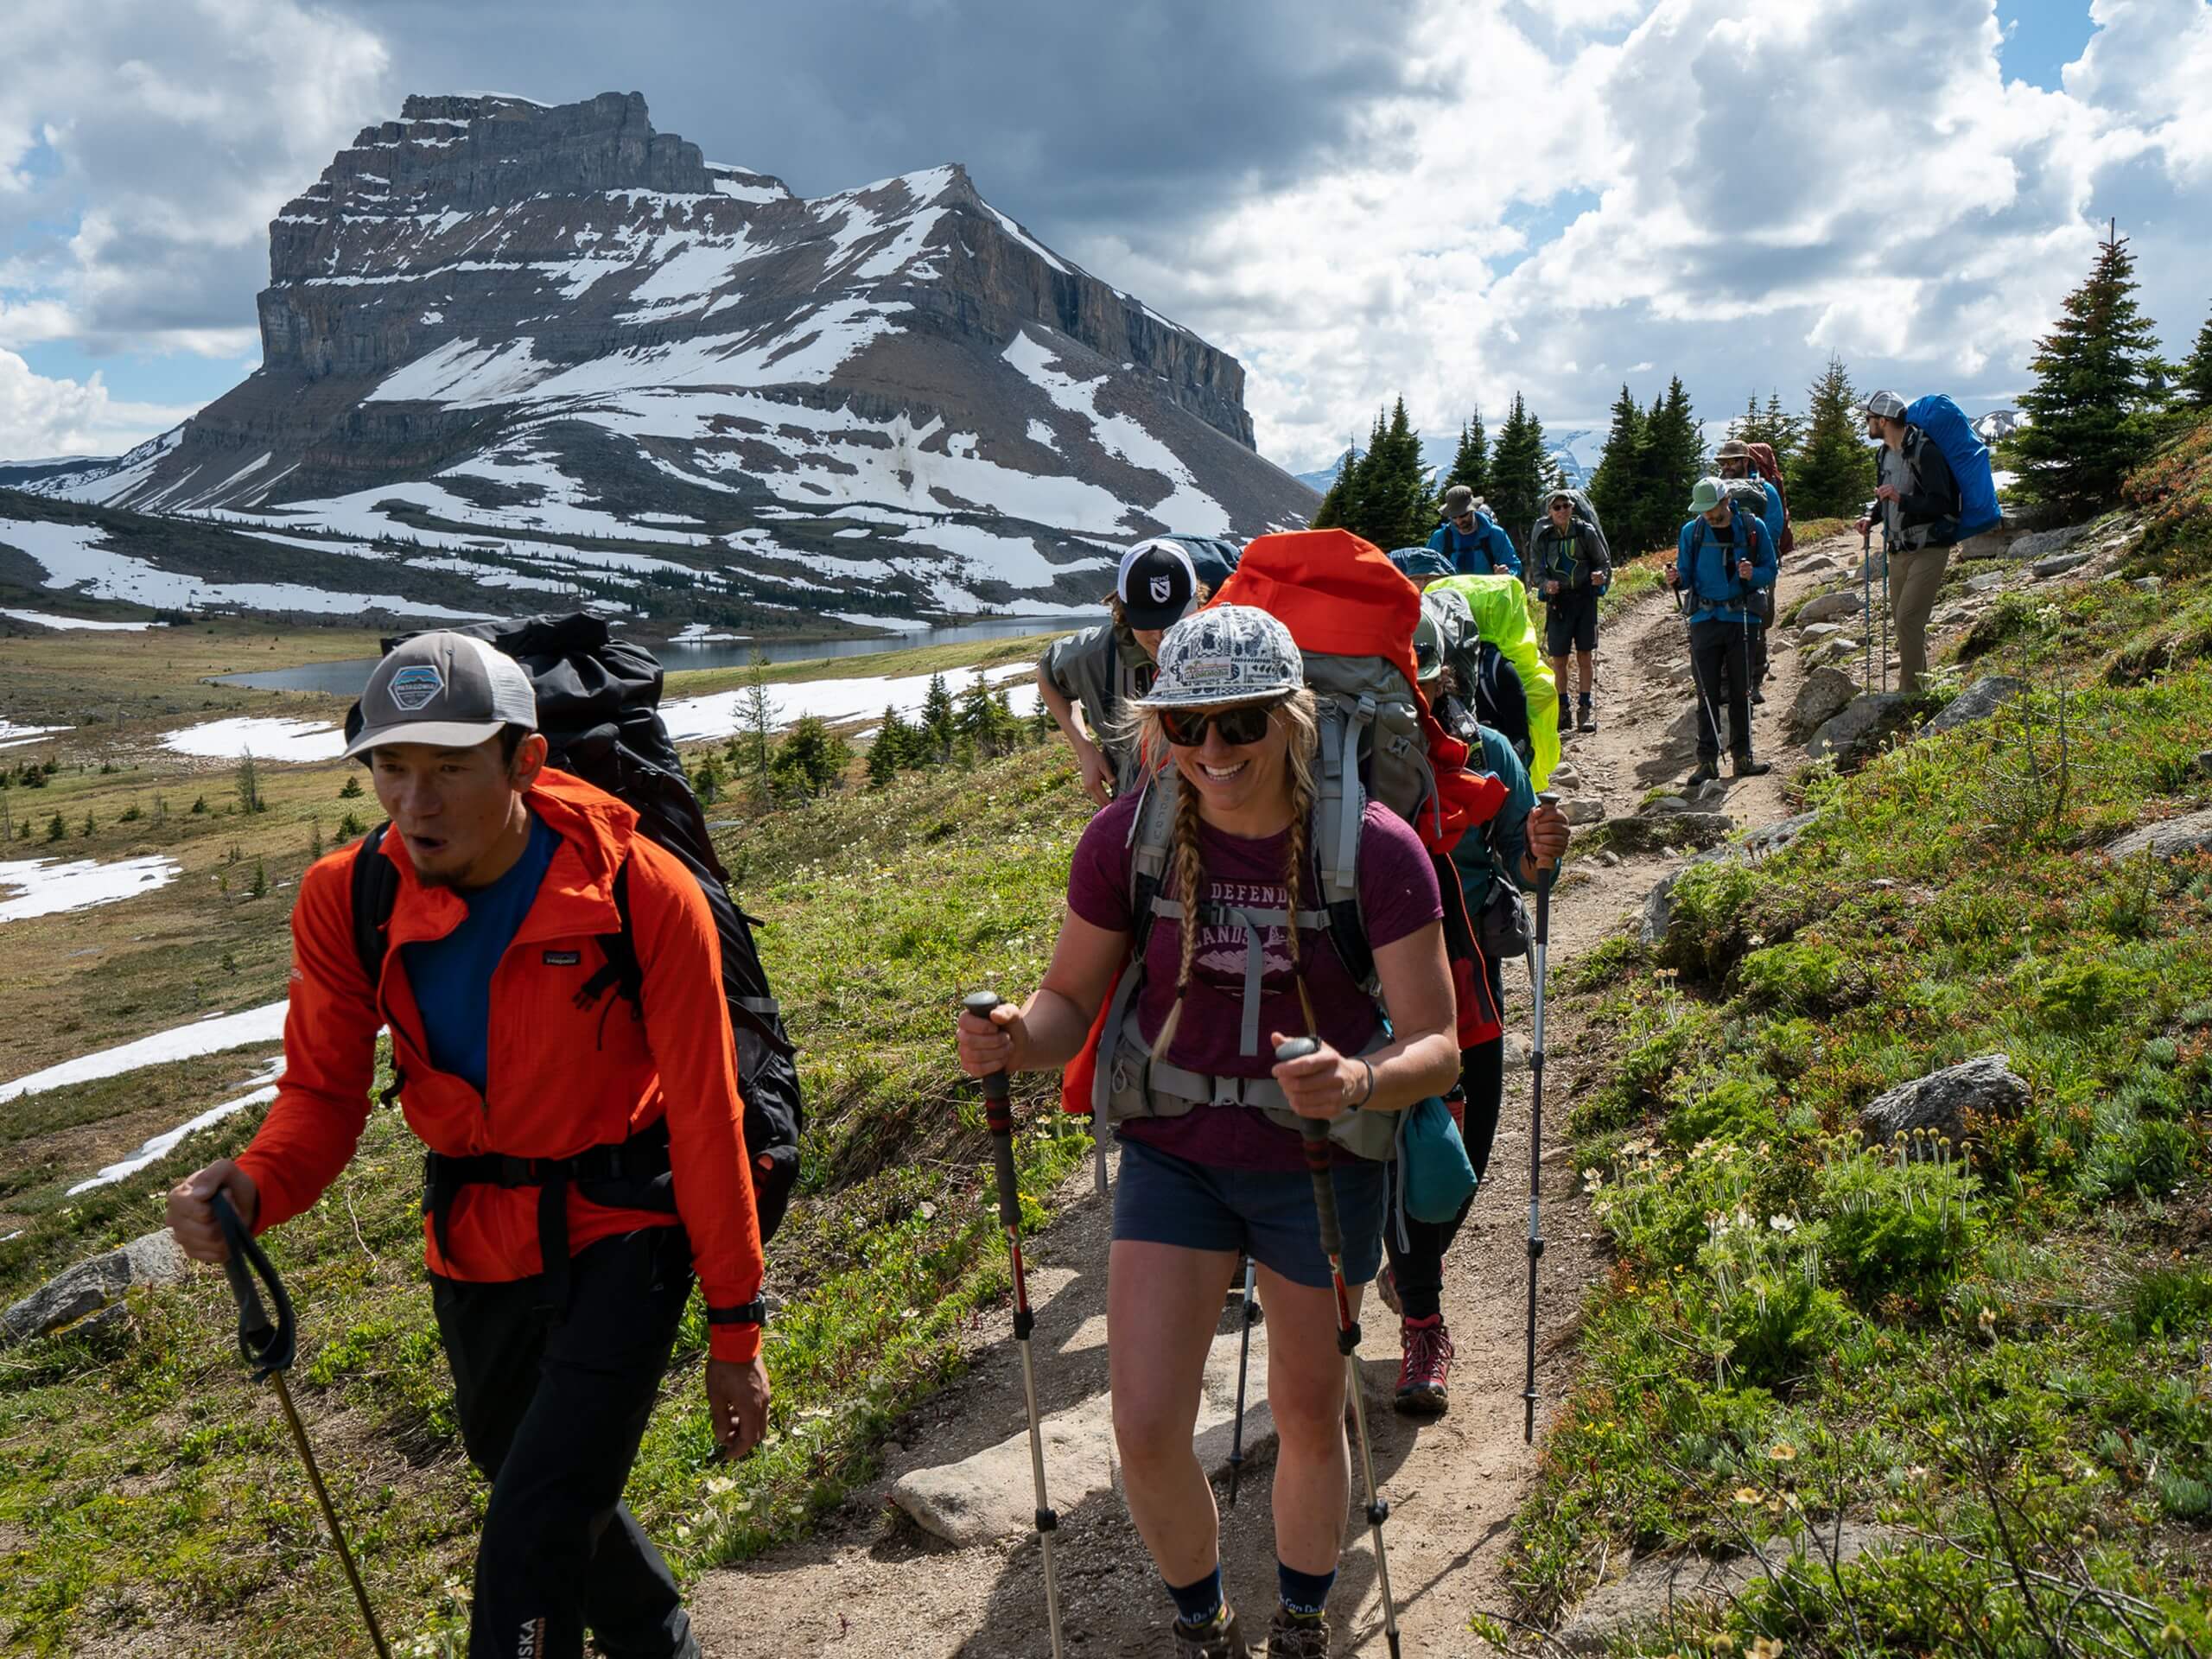 Group of backpackers walking in the Skoki Region with Mount Redoubt in the background